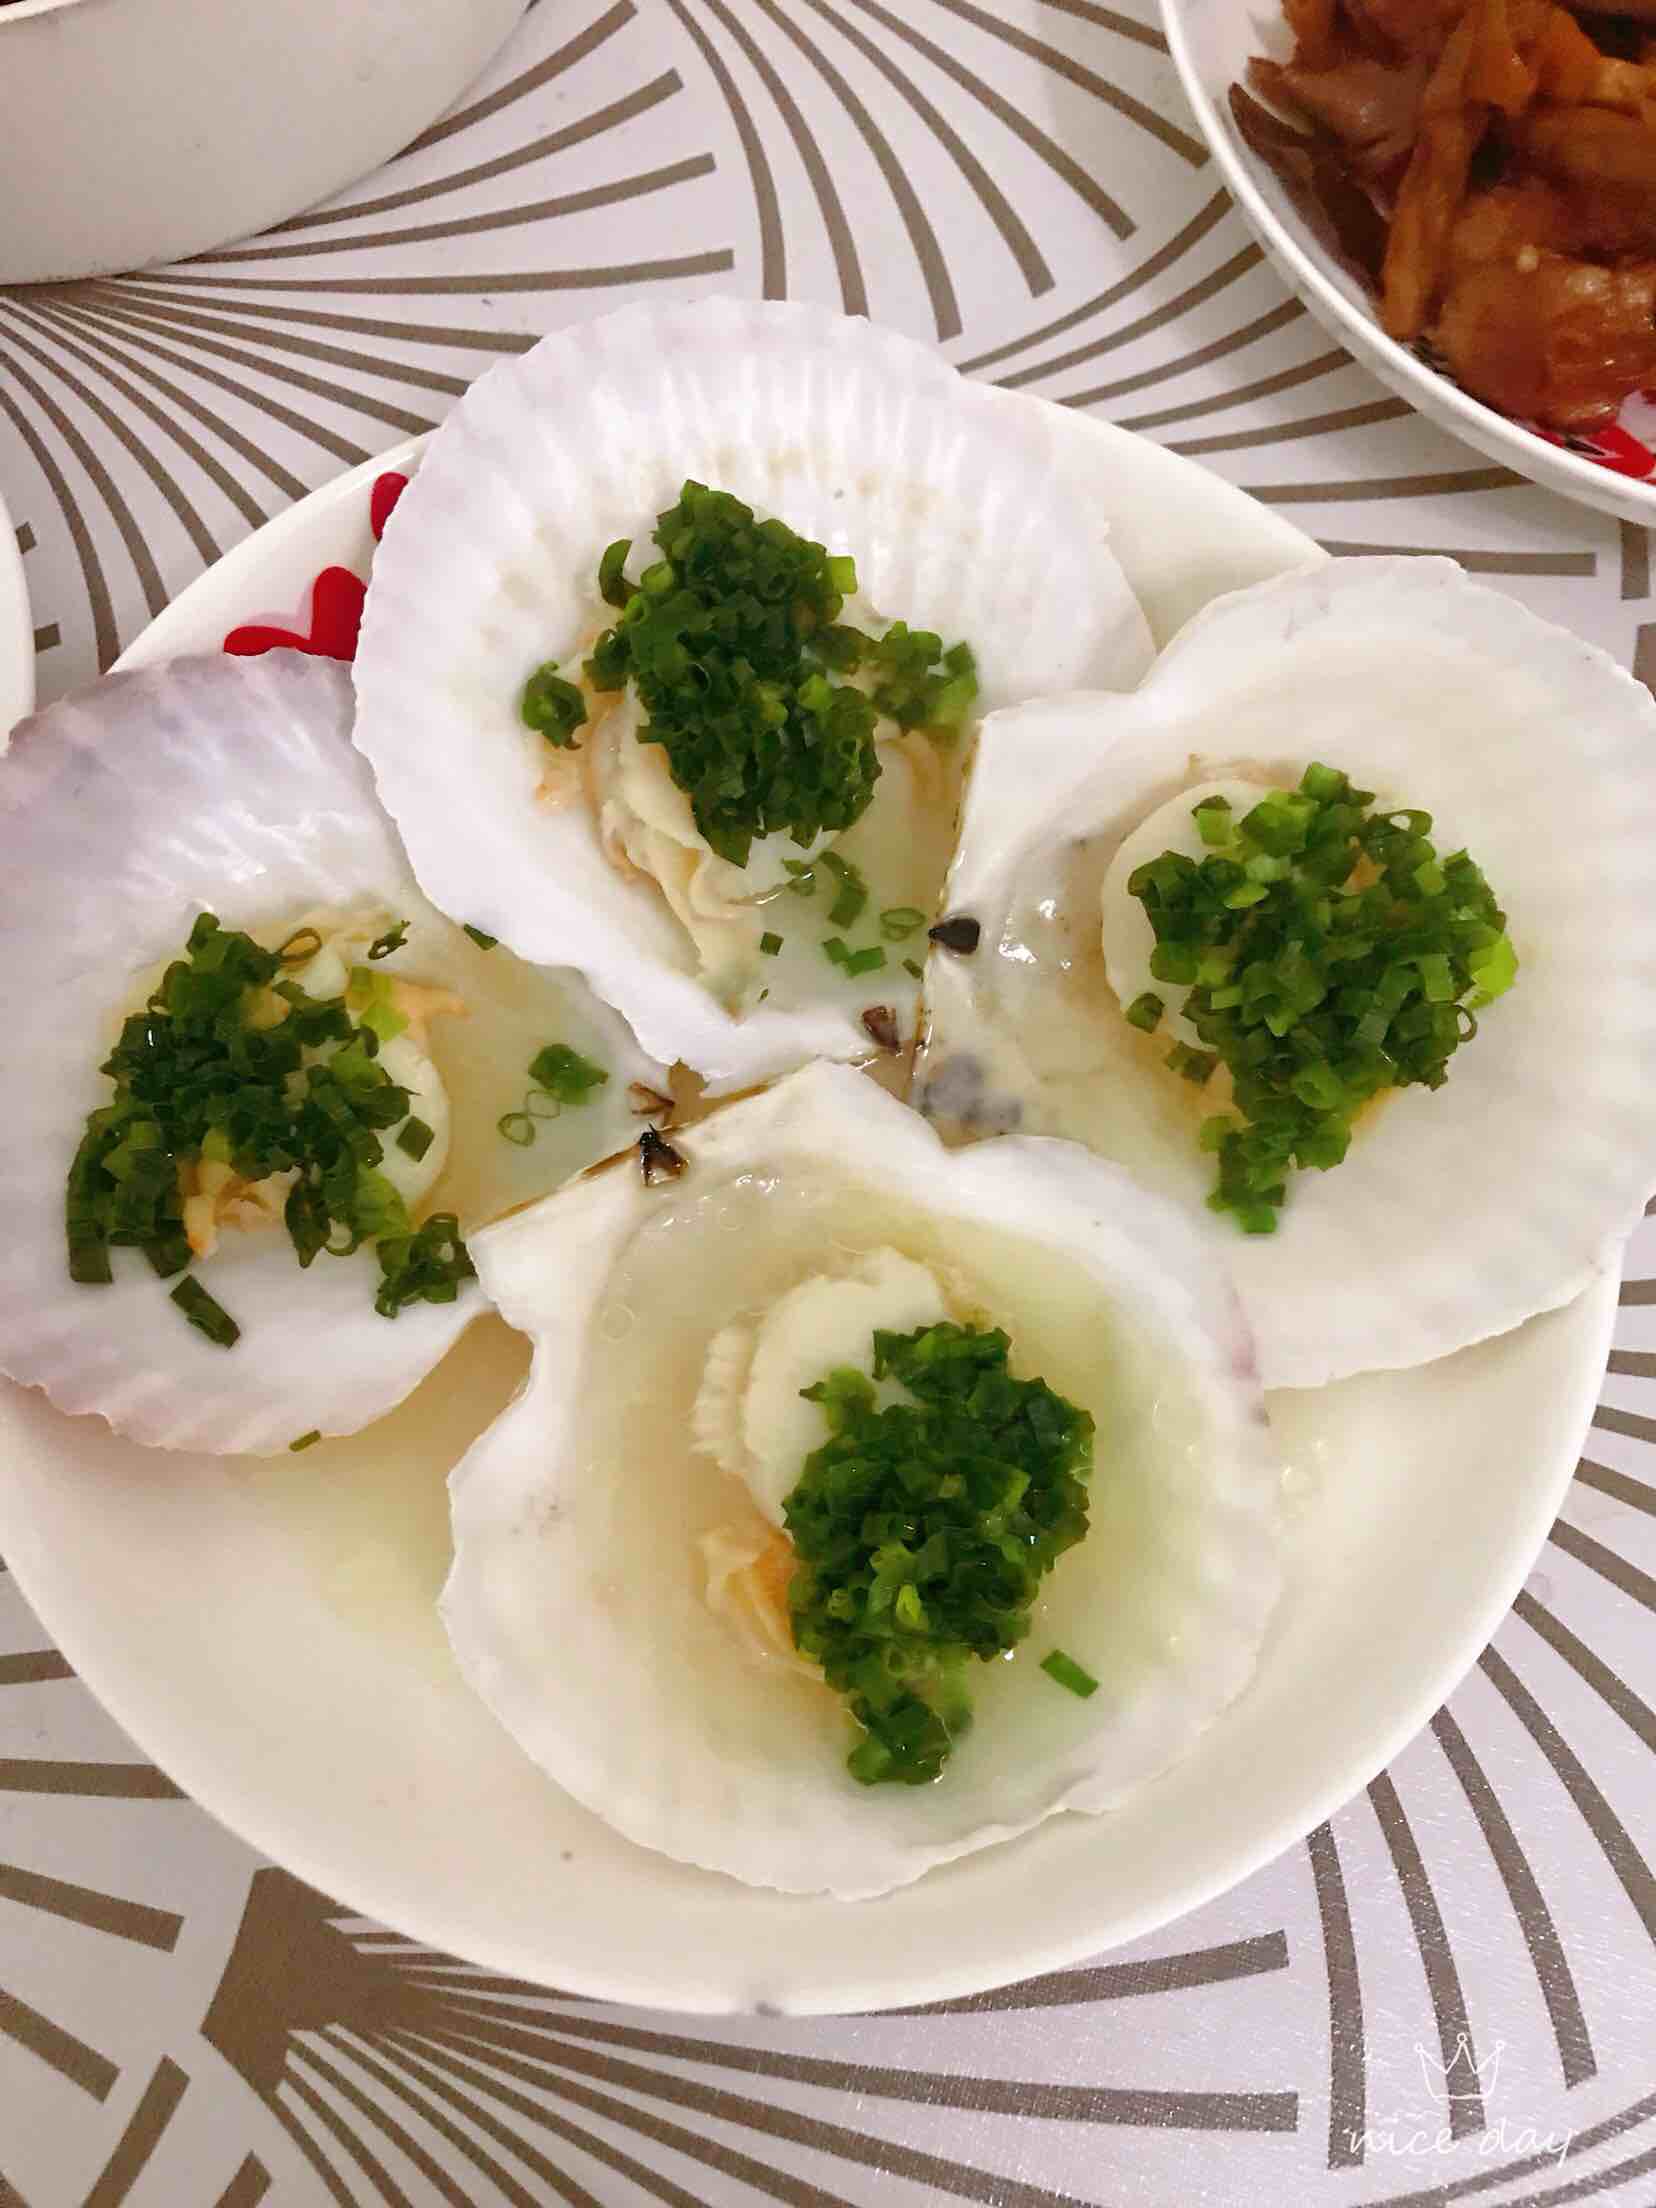 Steamed Scallops